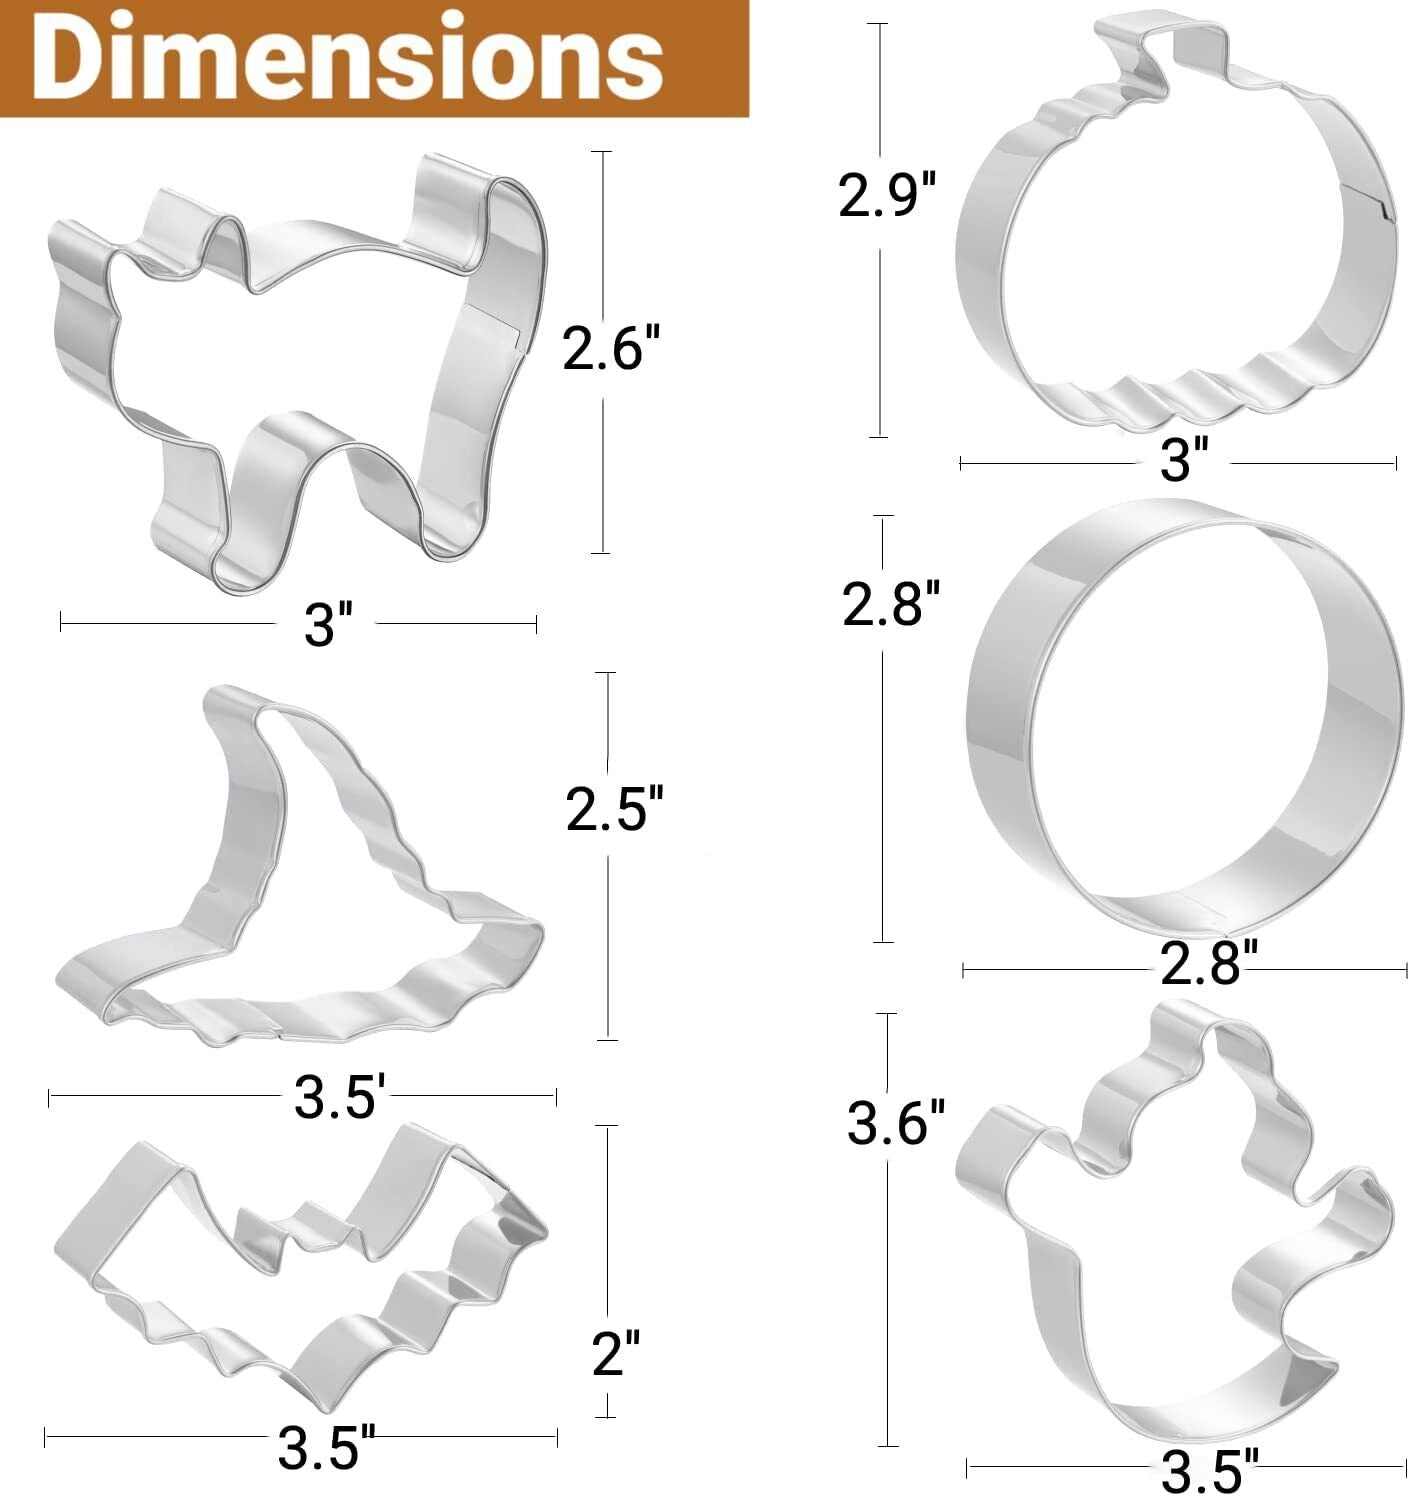 Cookie Cutters 6 PCS, Halloween Cookie Cutters by JOB JOL, 3'' to 3.5'' NEW